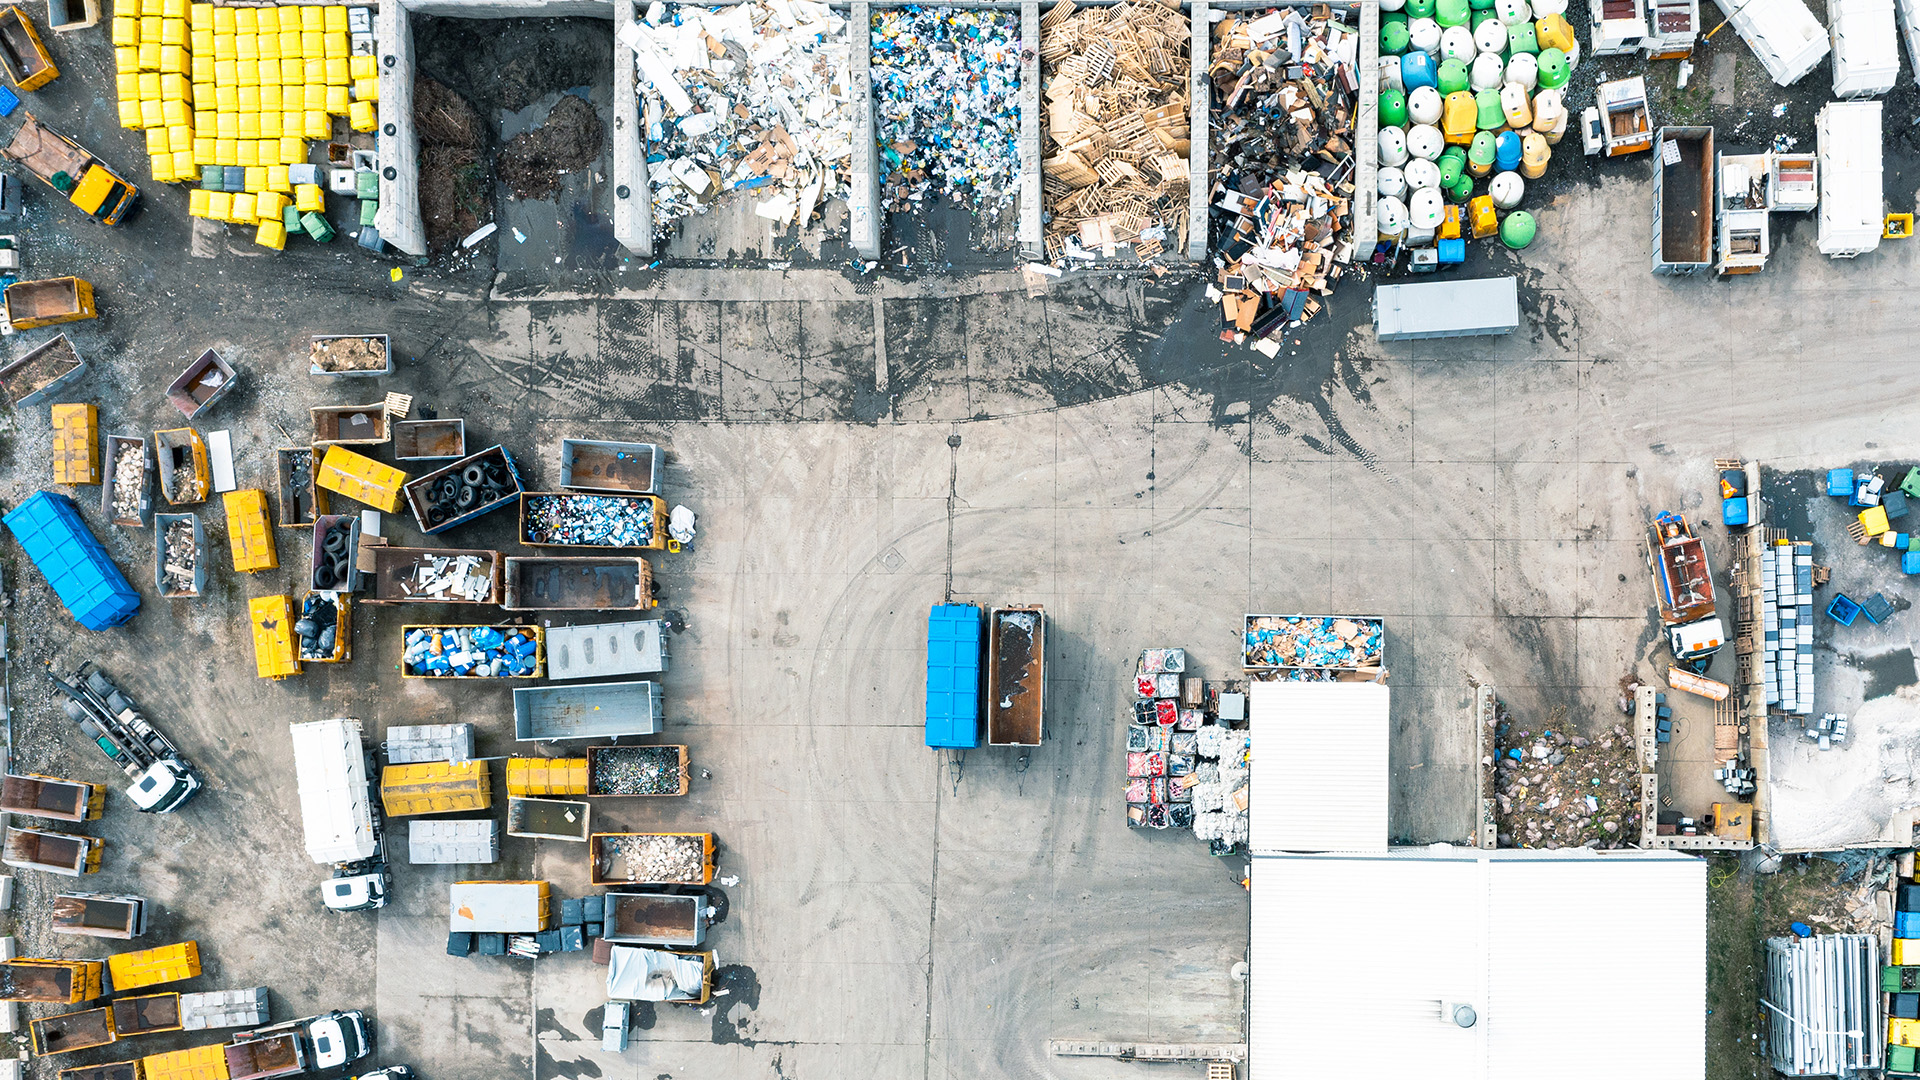 The right to appeal environmental compliance assessment reports: R (Suez Recycling and Recovery UK Ltd) v. Environment Agency 